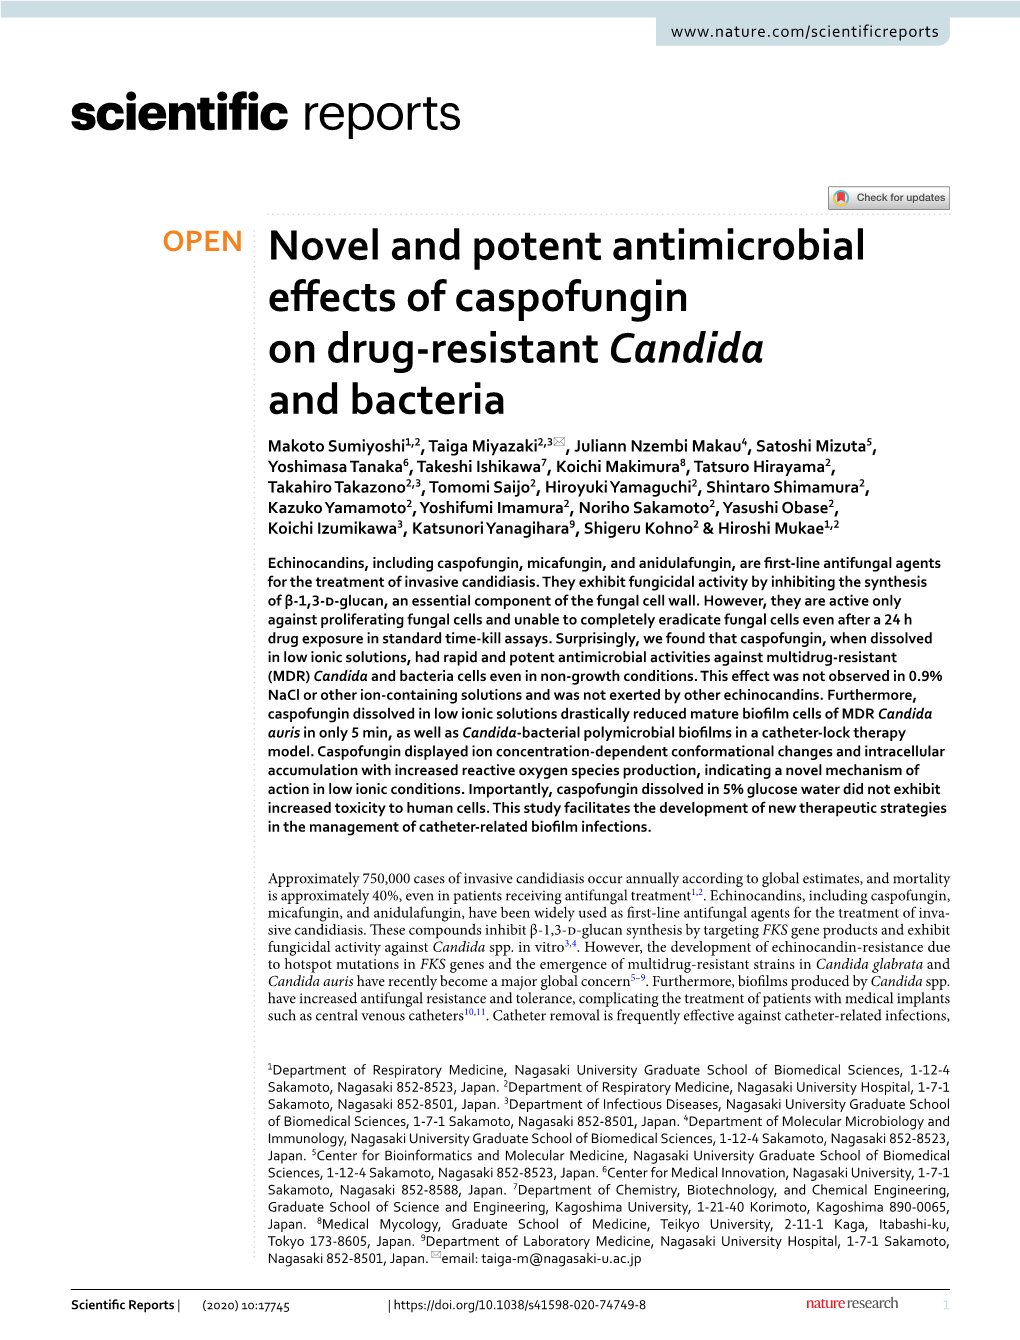 Novel and Potent Antimicrobial Effects of Caspofungin on Drug-Resistant Candida and Bacteria